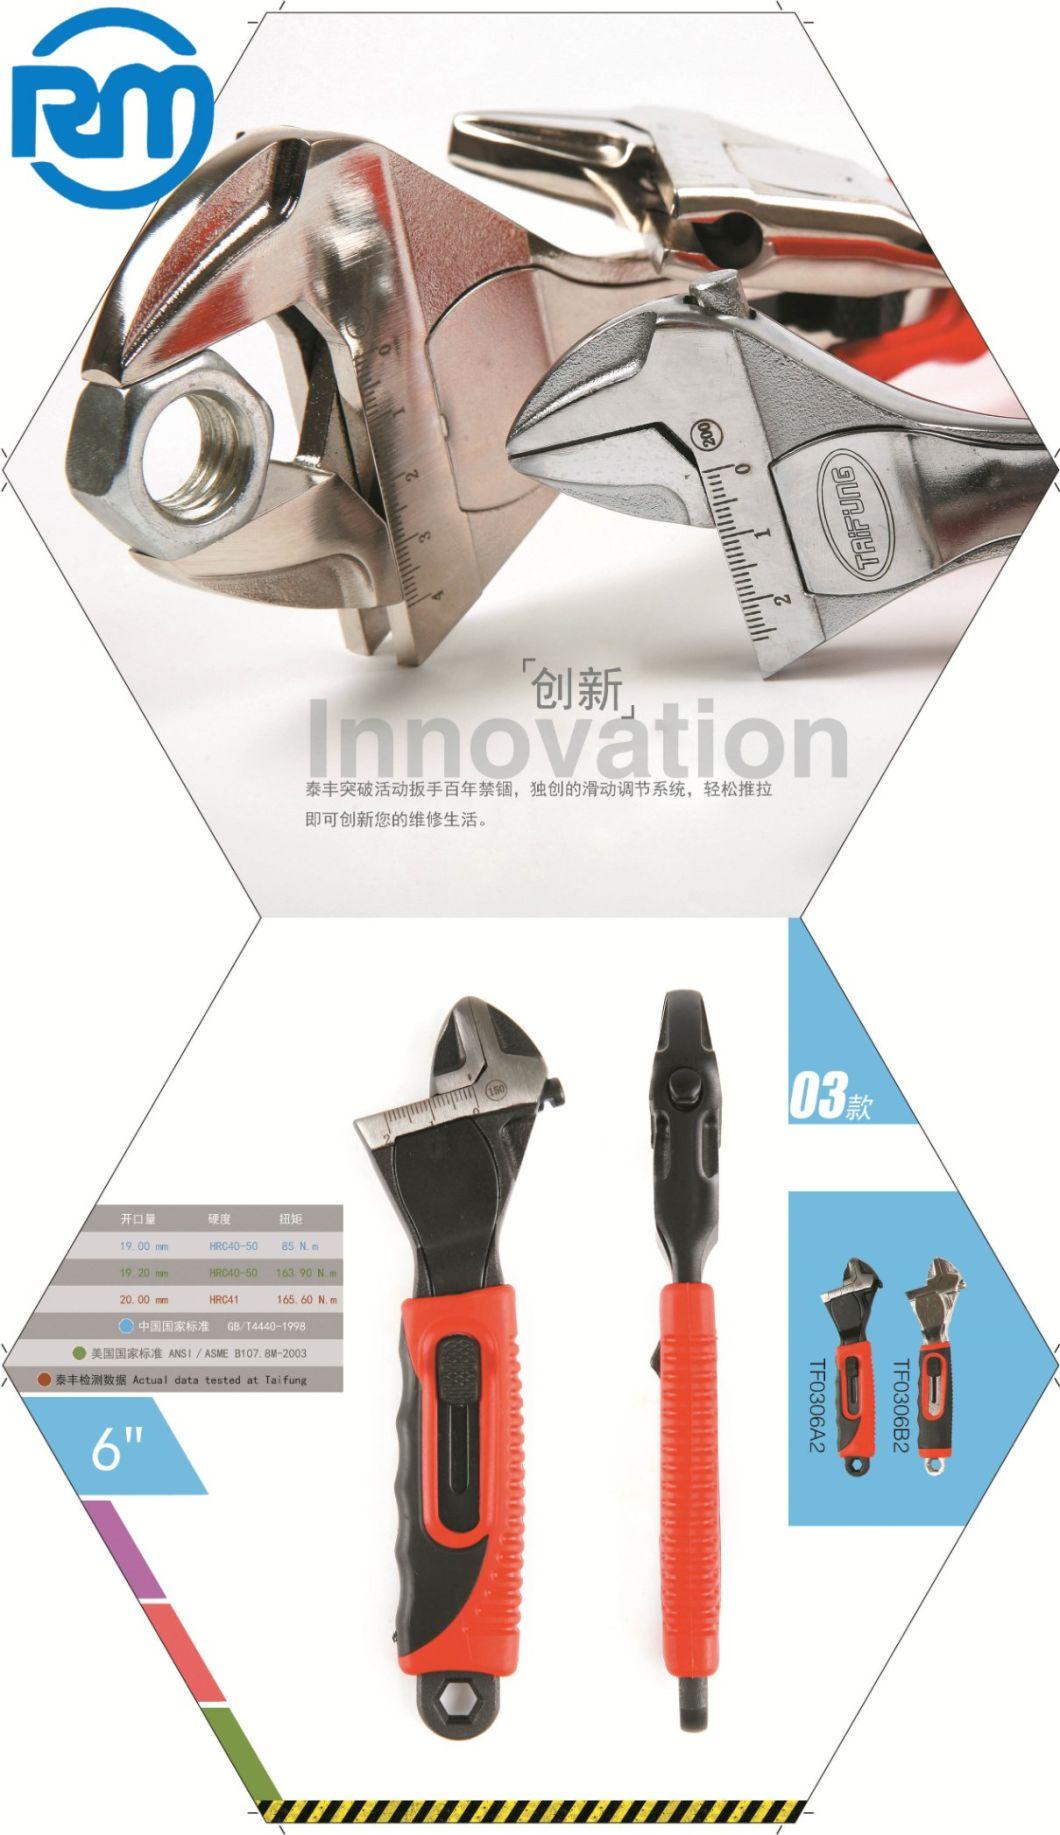 Innovation Sliding American ASME Standards Nickel Plating Surface Wrench Unique Sliding Adjustment System Easily Push and Pull American ASME S